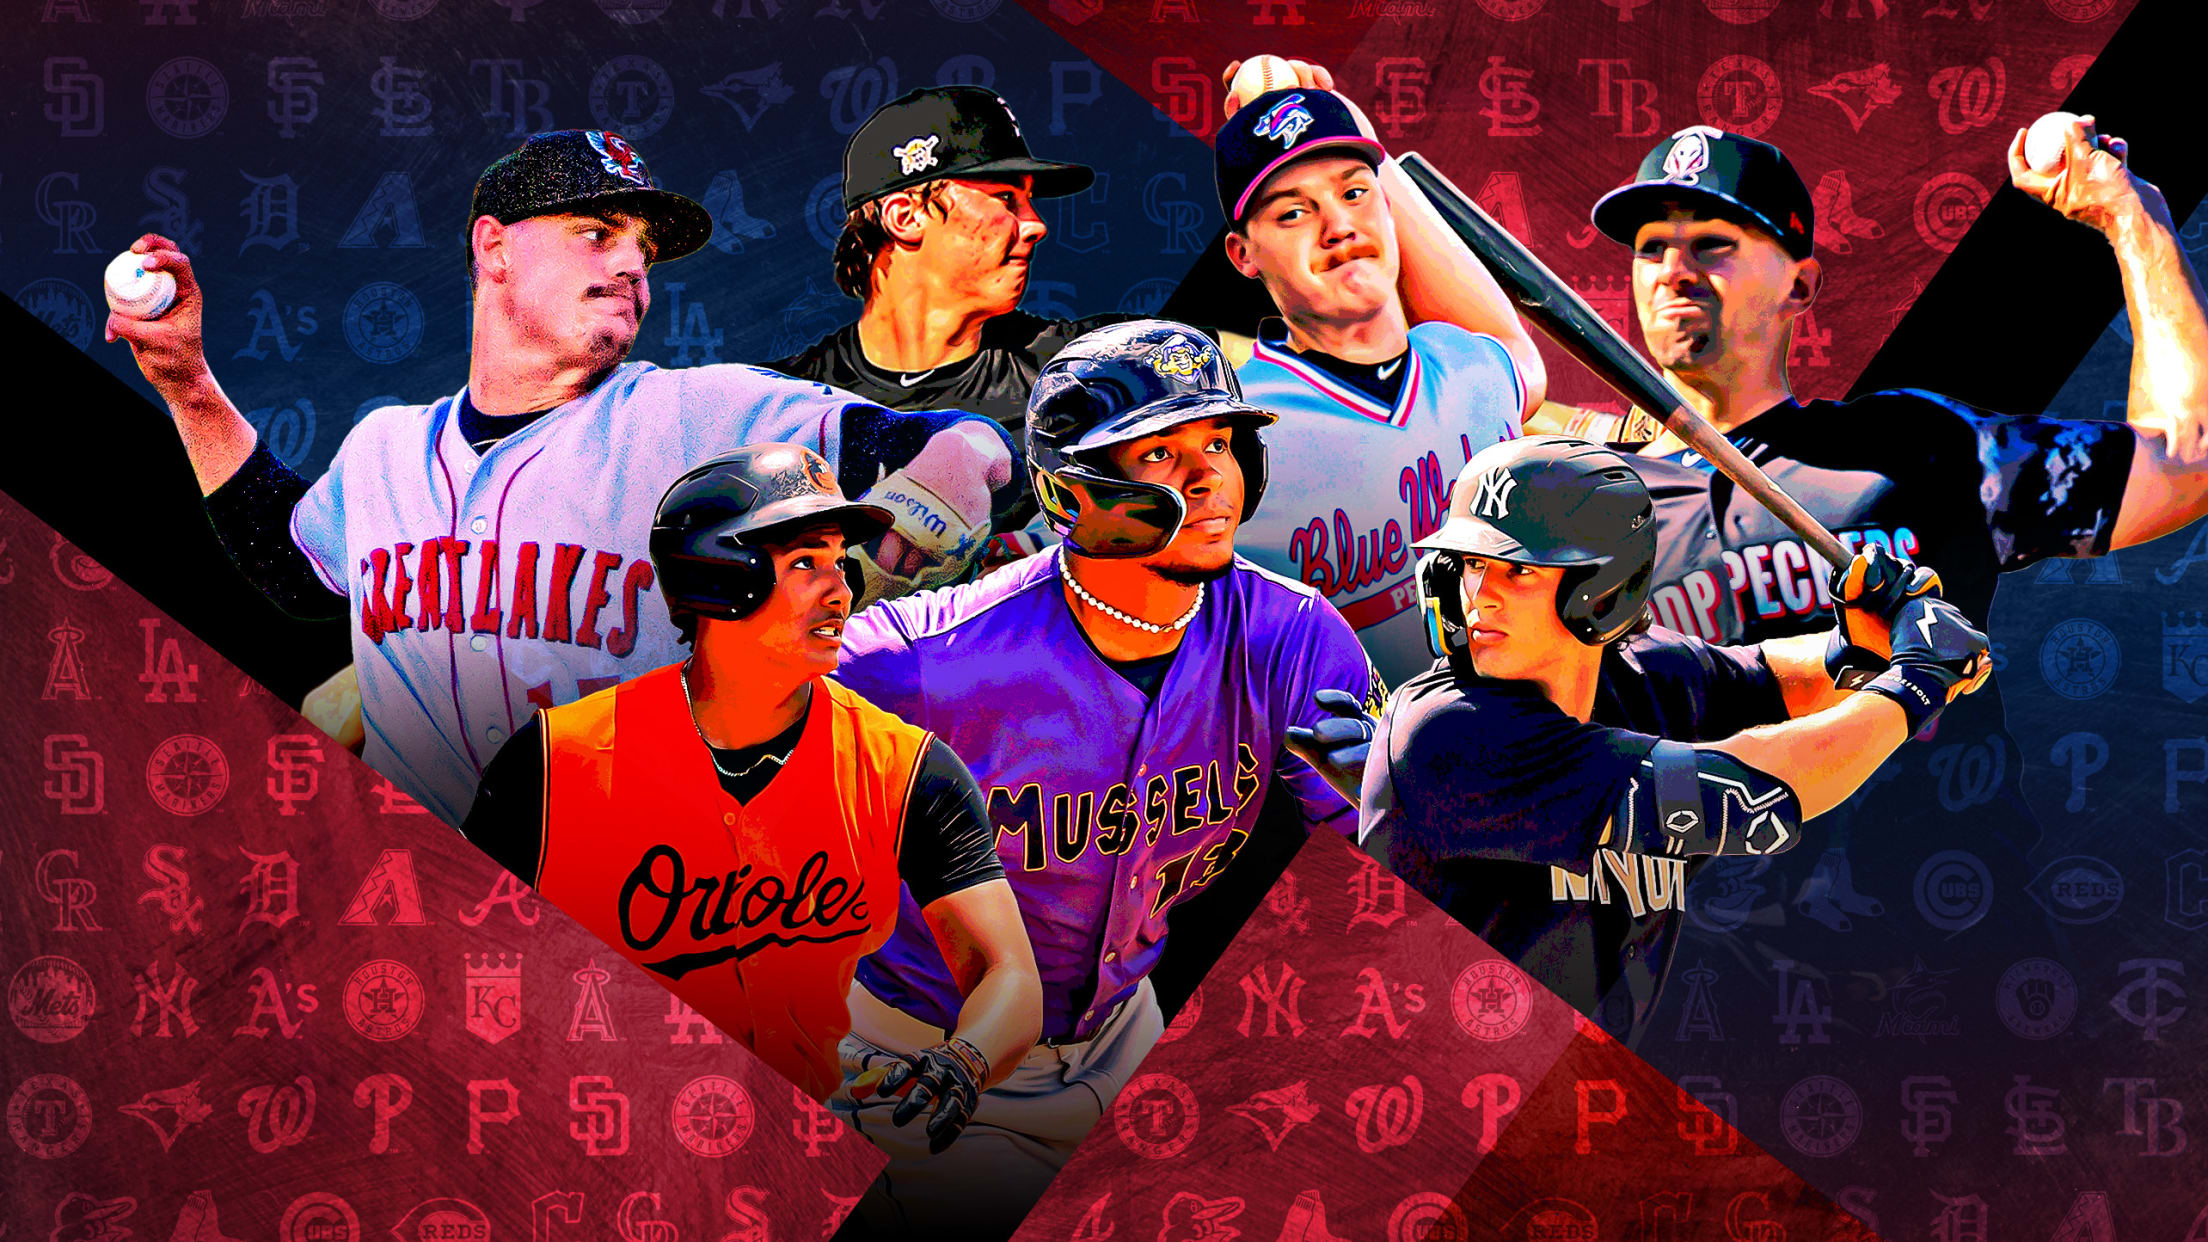 A photo illustration of 7 prospects clustered amid red and blue shapes with MLB team logos in them